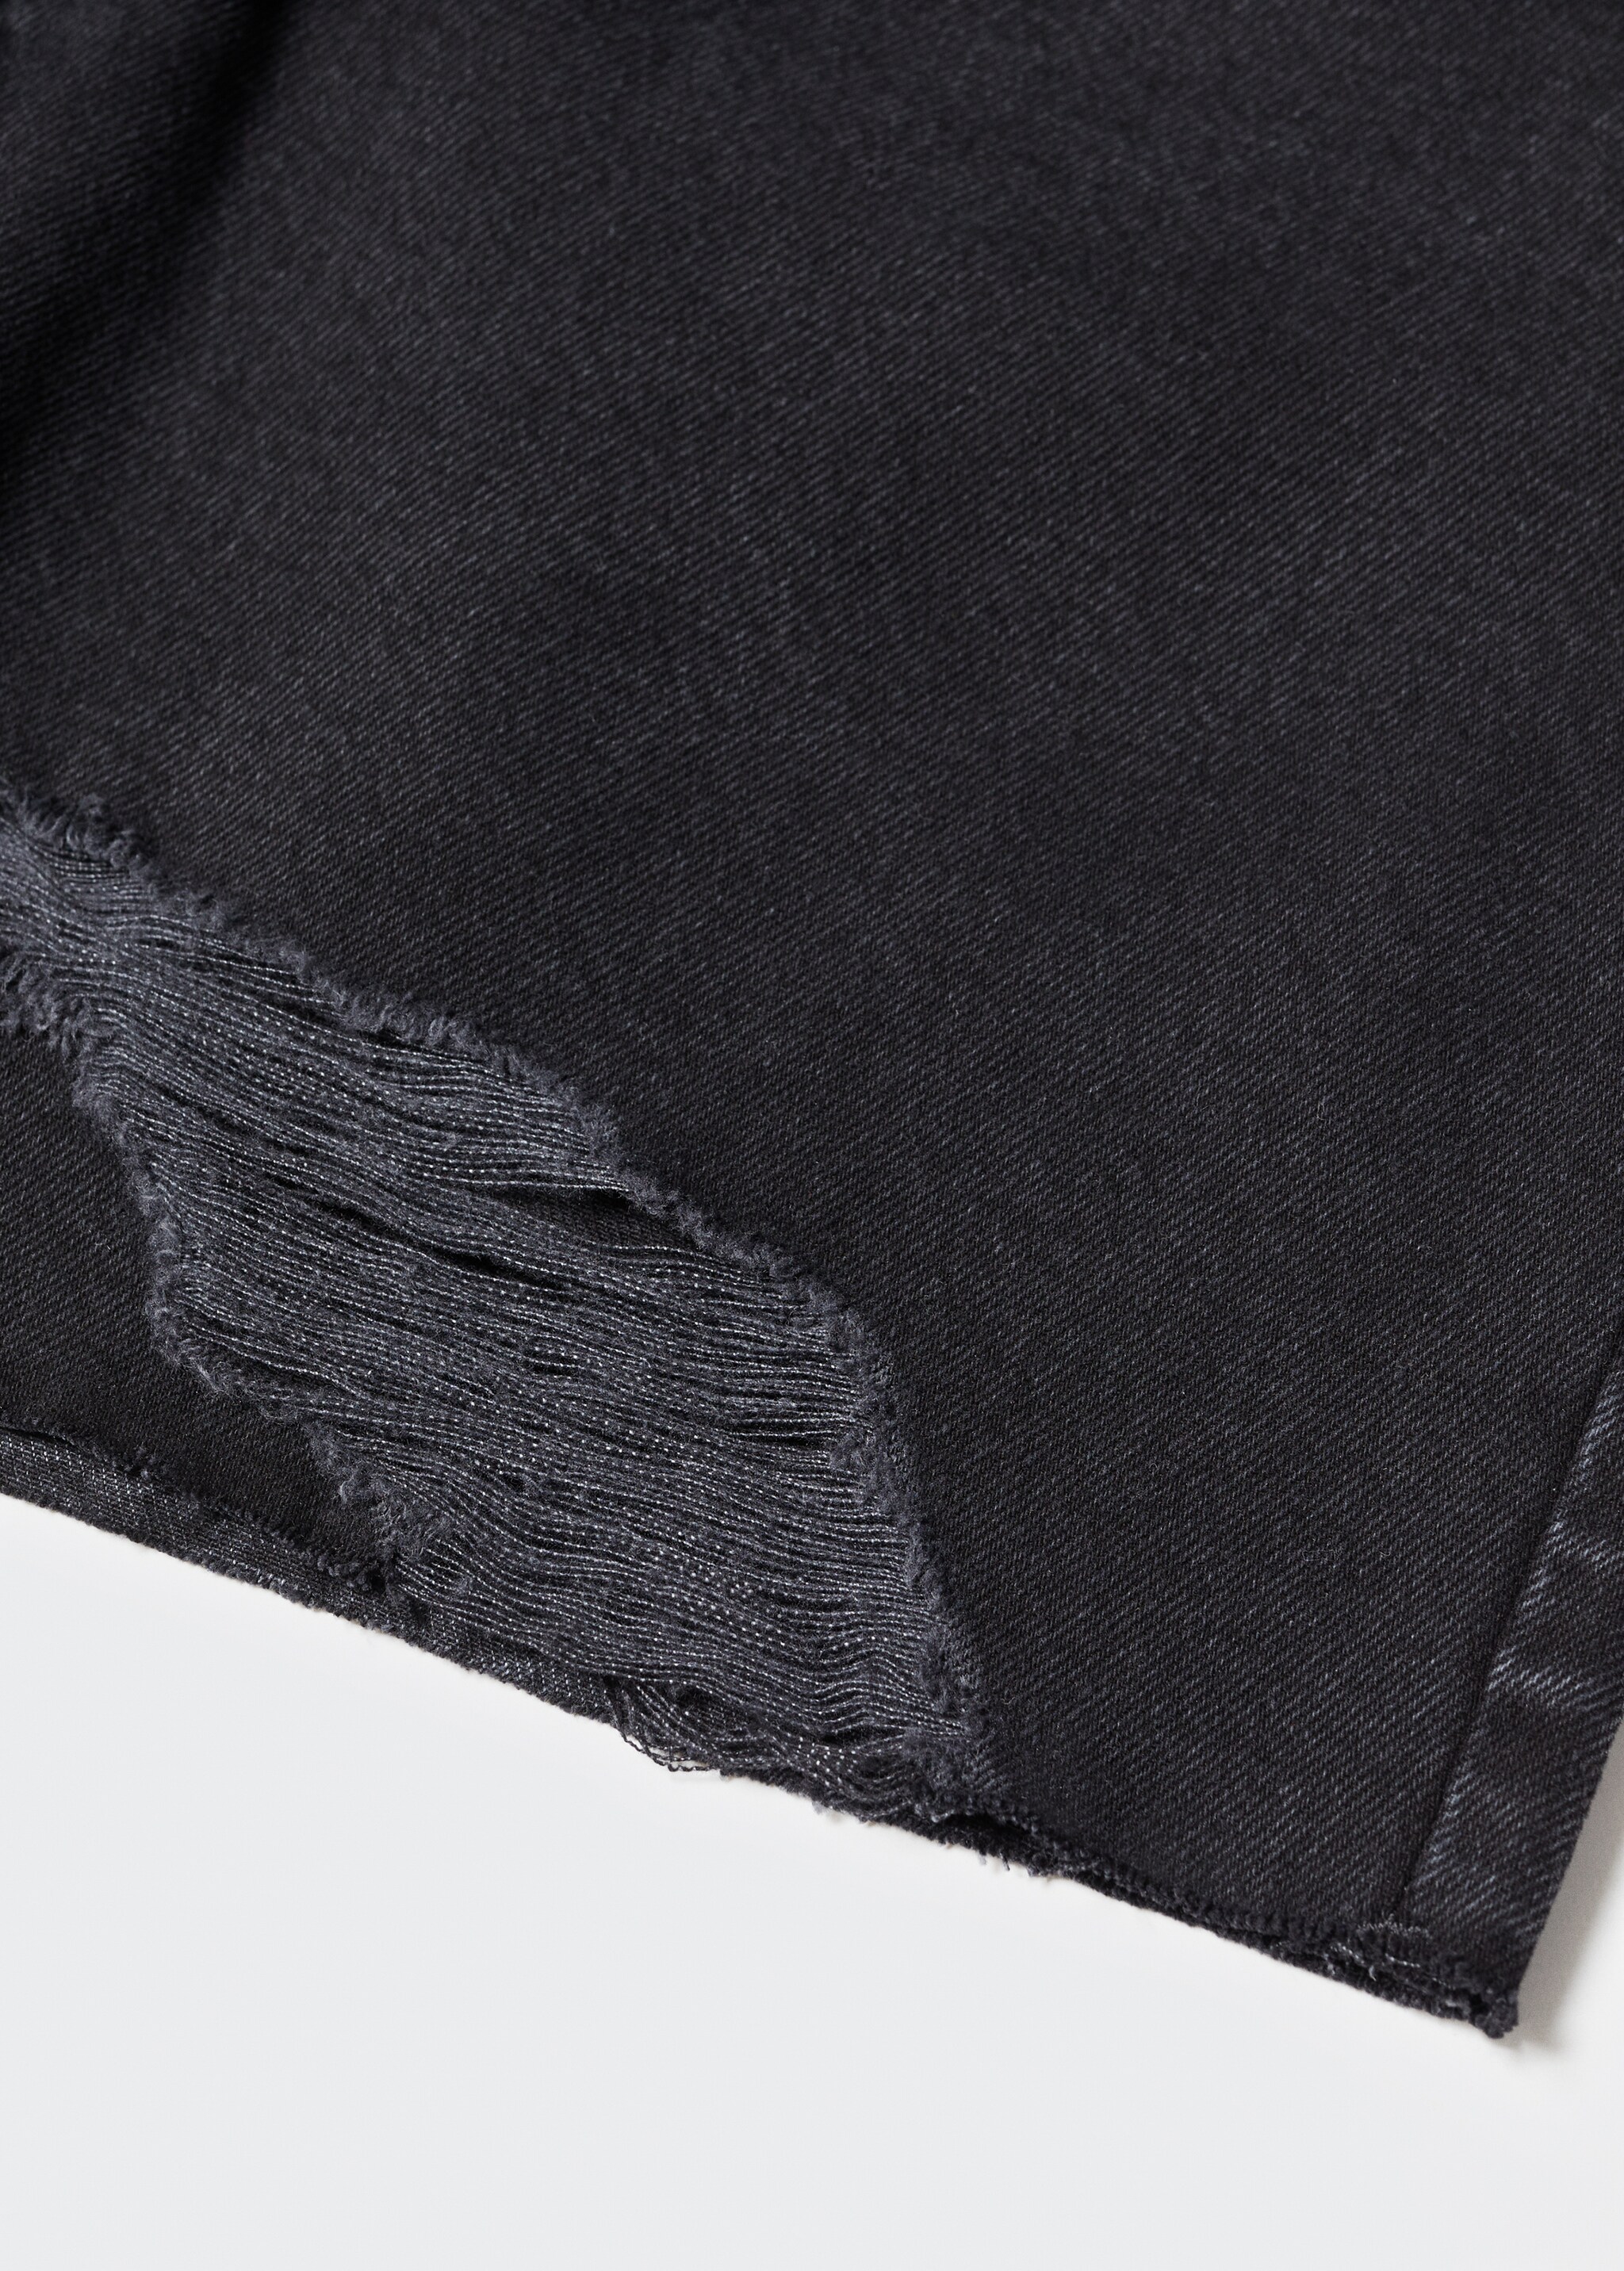 Decorative ripped denim bermuda shorts - Details of the article 8